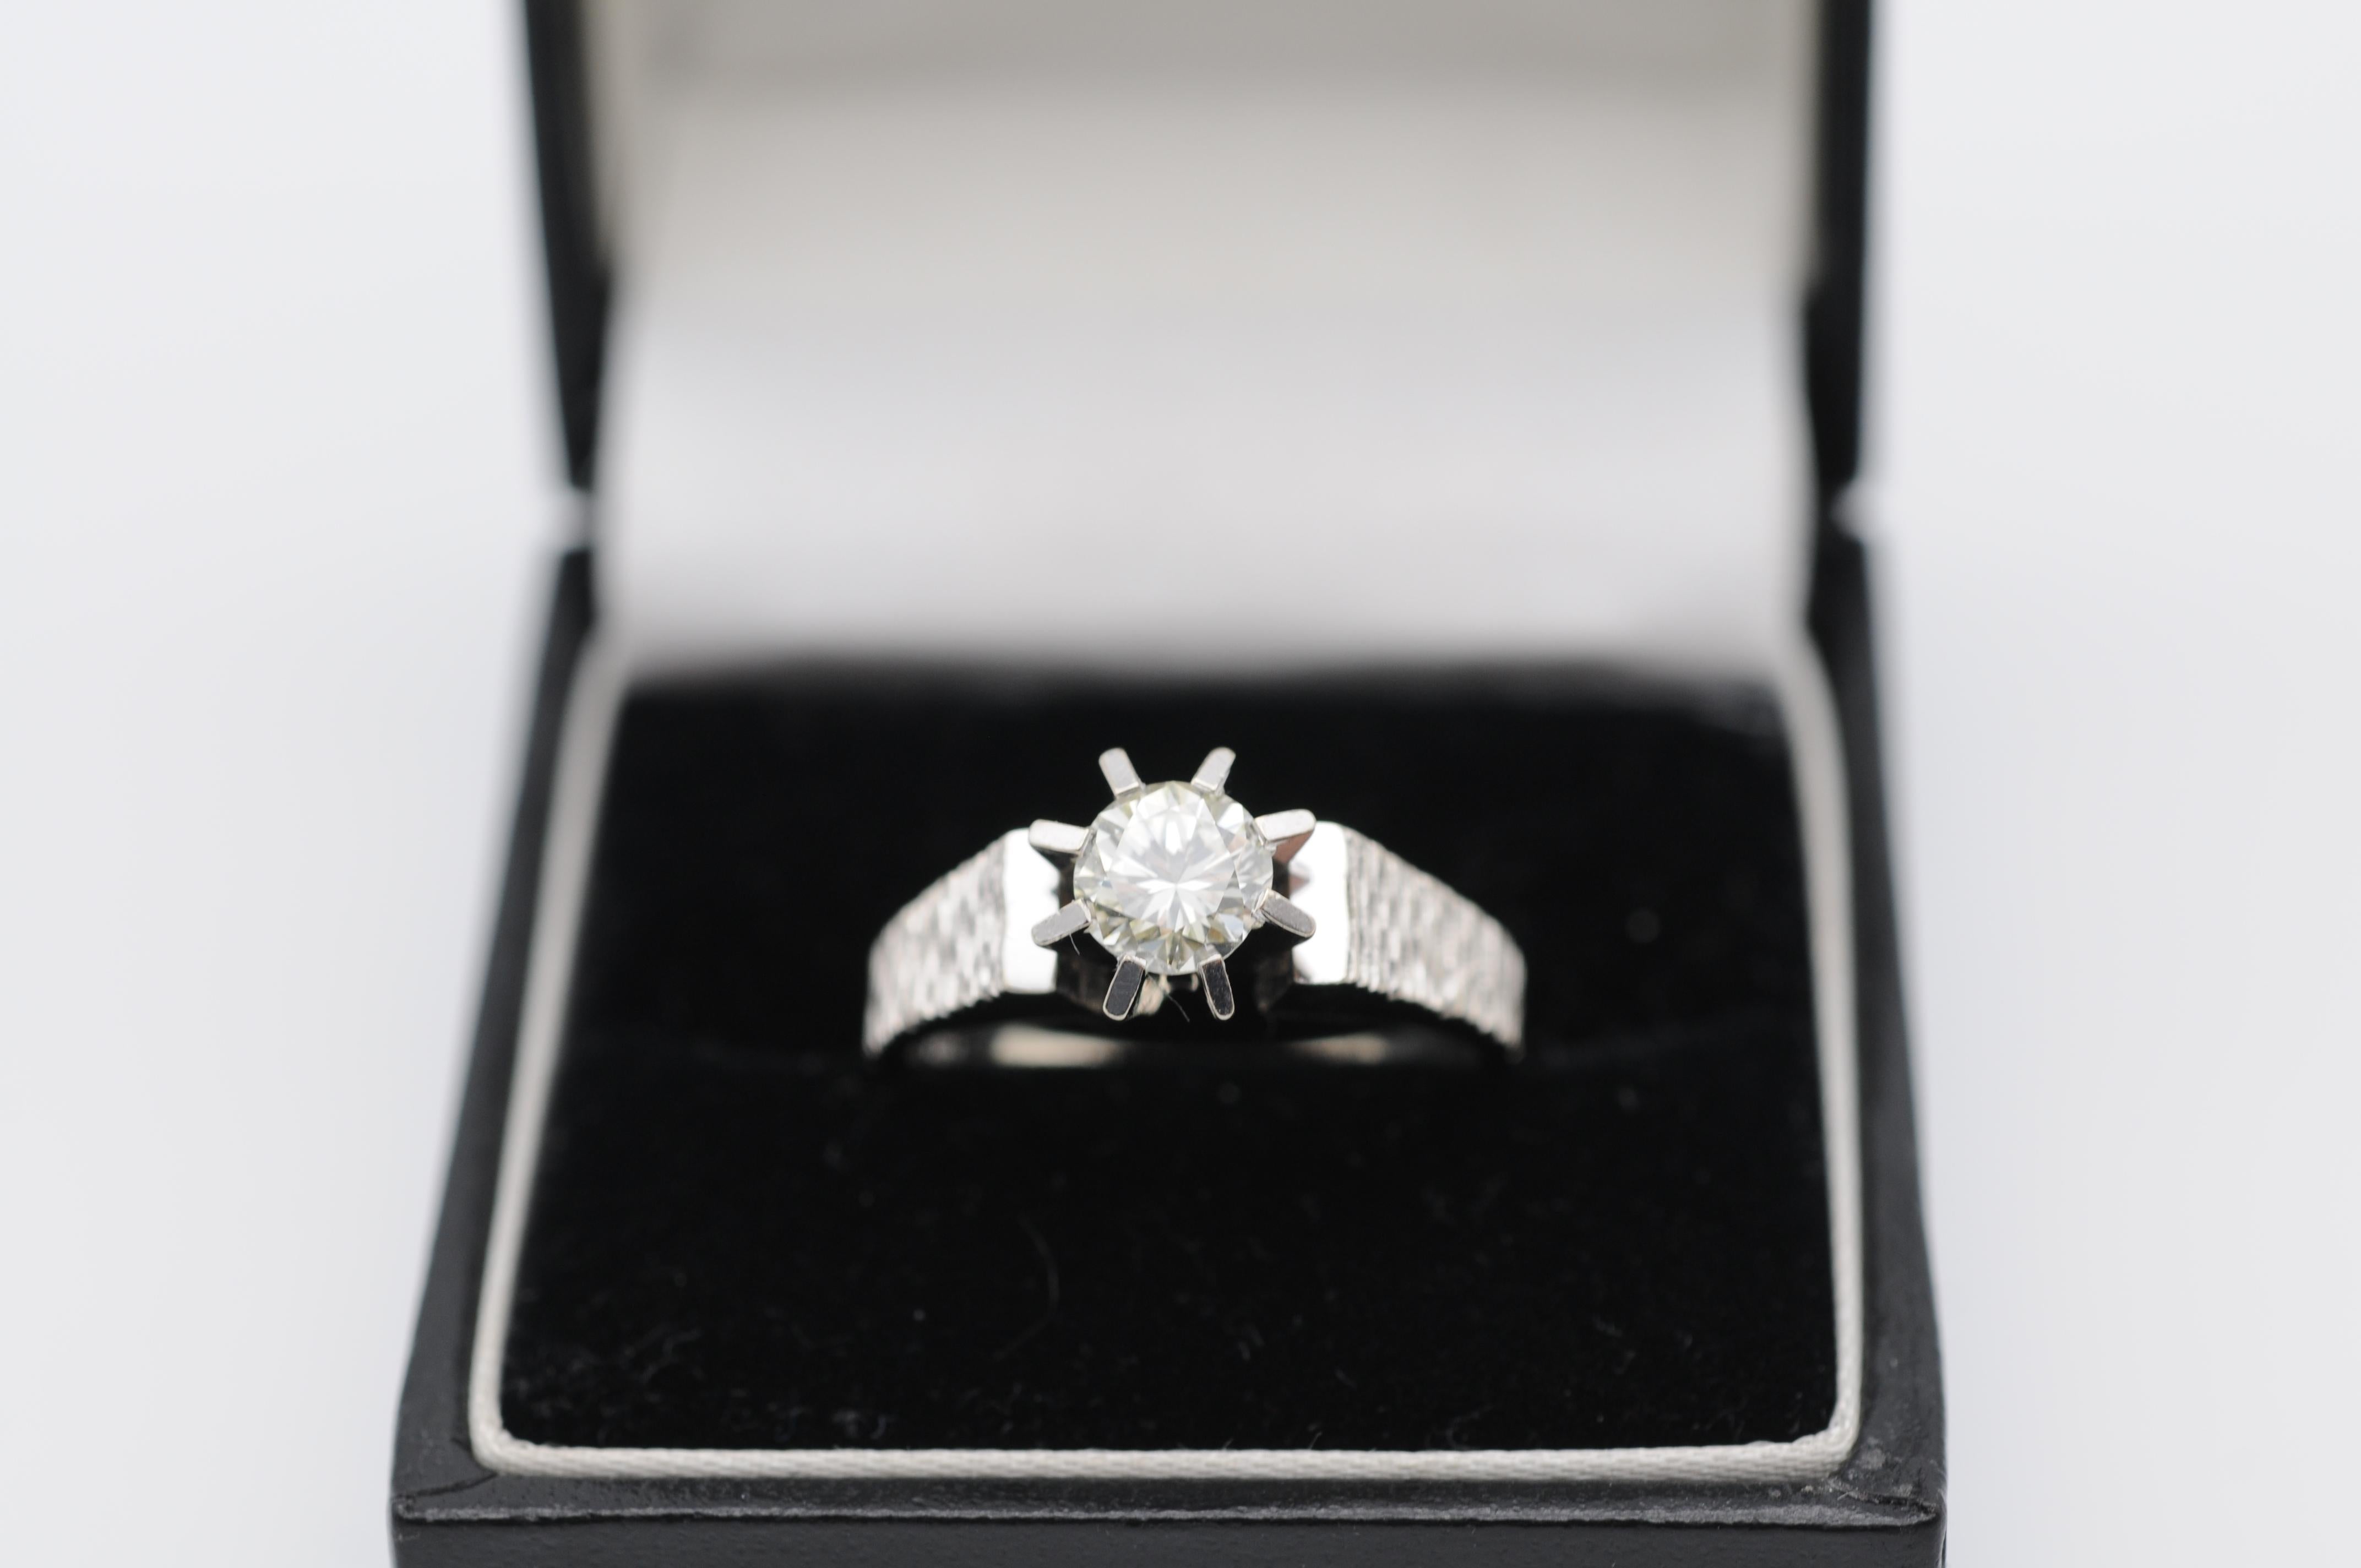 This magnificent 0.80 Ct. Solitaire Brilliant Ring in 14k Yellow Gold is the epitome of classic elegance. The stunning solitaire diamond sits majestically atop the high applied setting, its brilliance and fire accentuated by the warm glow of the 14k